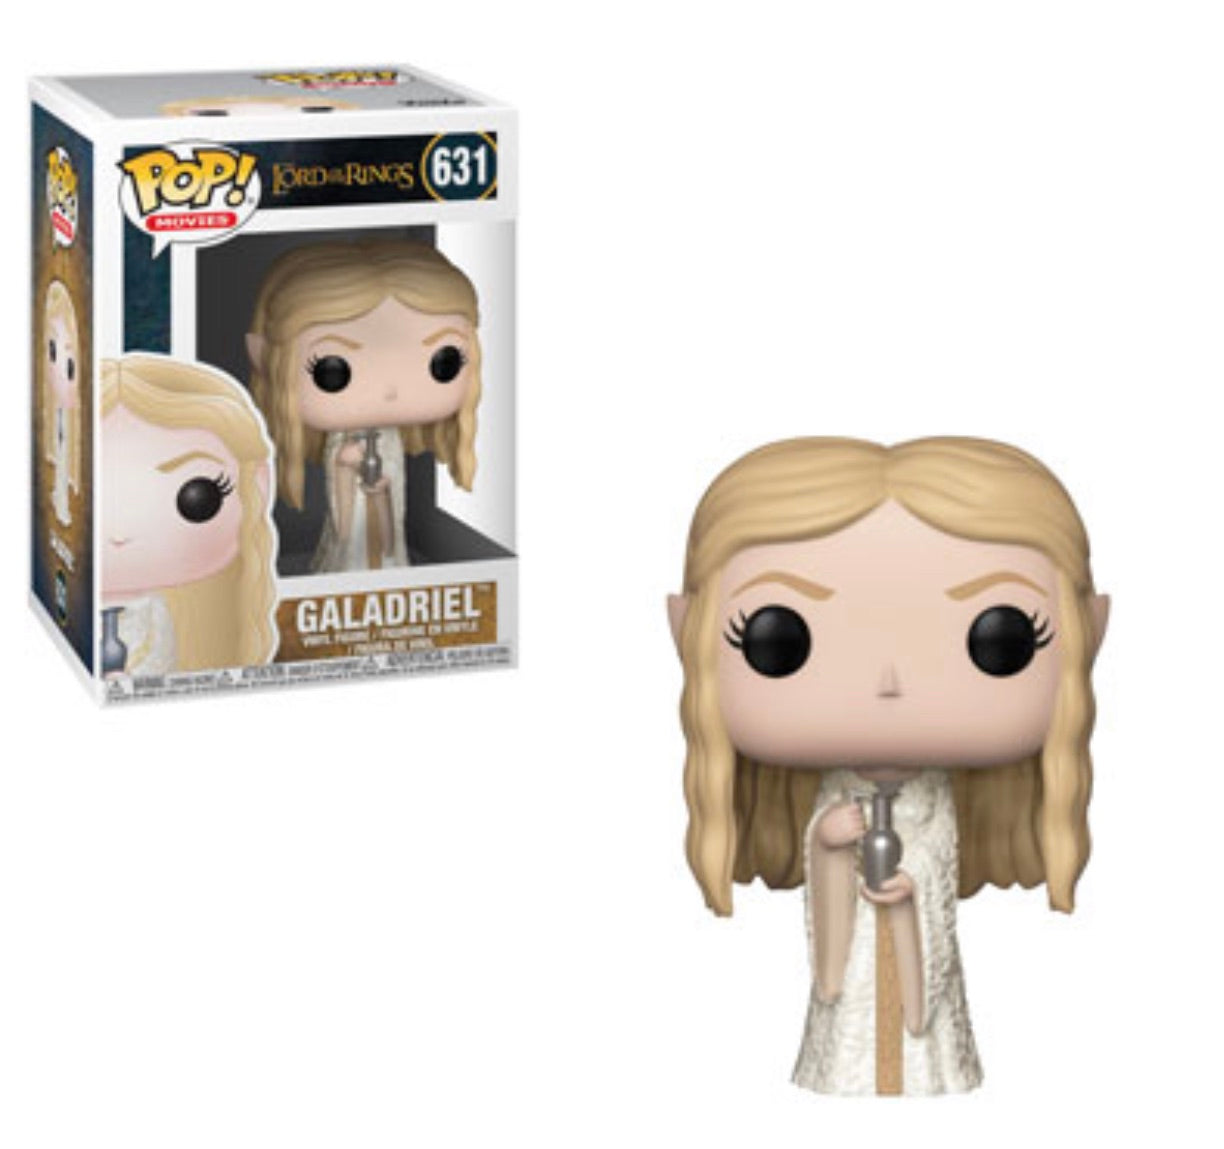 (Preorder) Pop! Movies: Lord of the Rings Galadriel